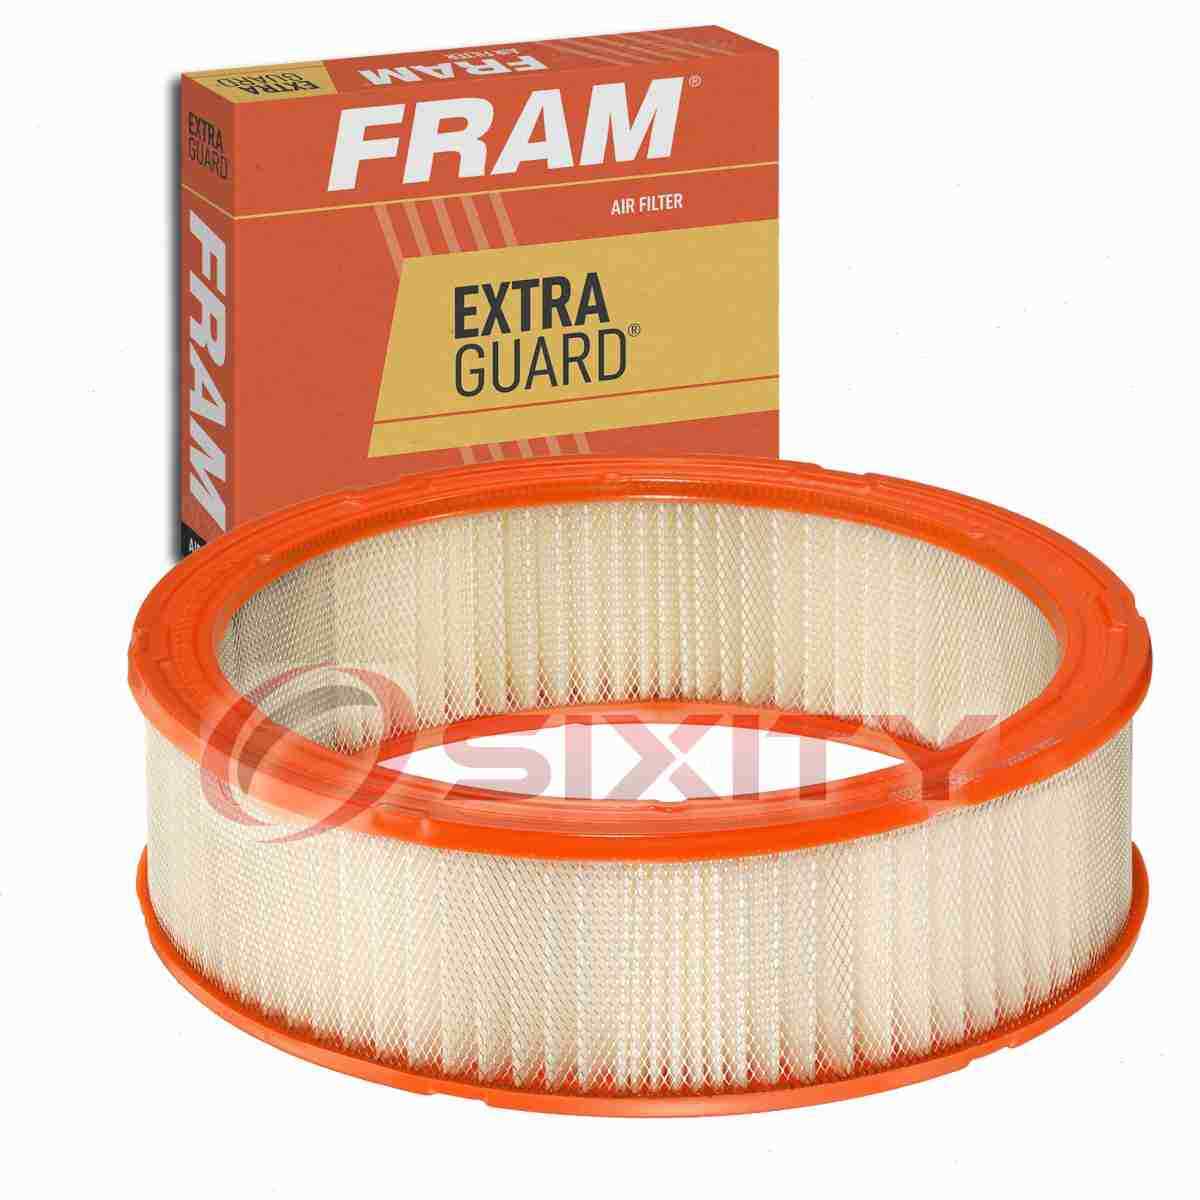 FRAM Extra Guard Air Filter for 1981-1984 GMC Caballero Intake Inlet gl